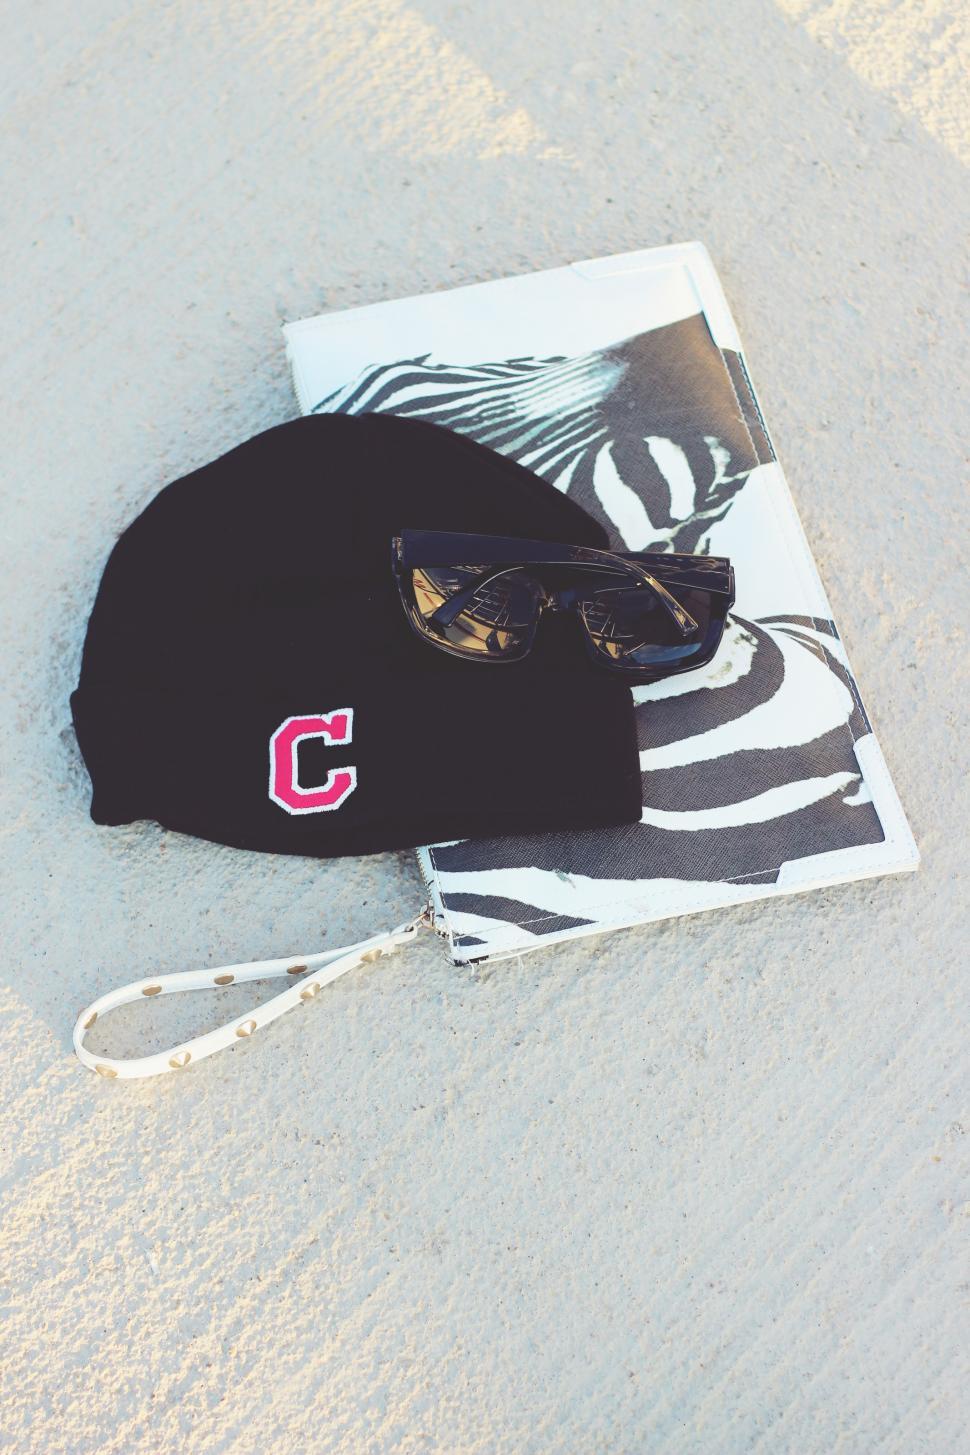 Free Image of Hat and Sunglasses on Beach Towel 